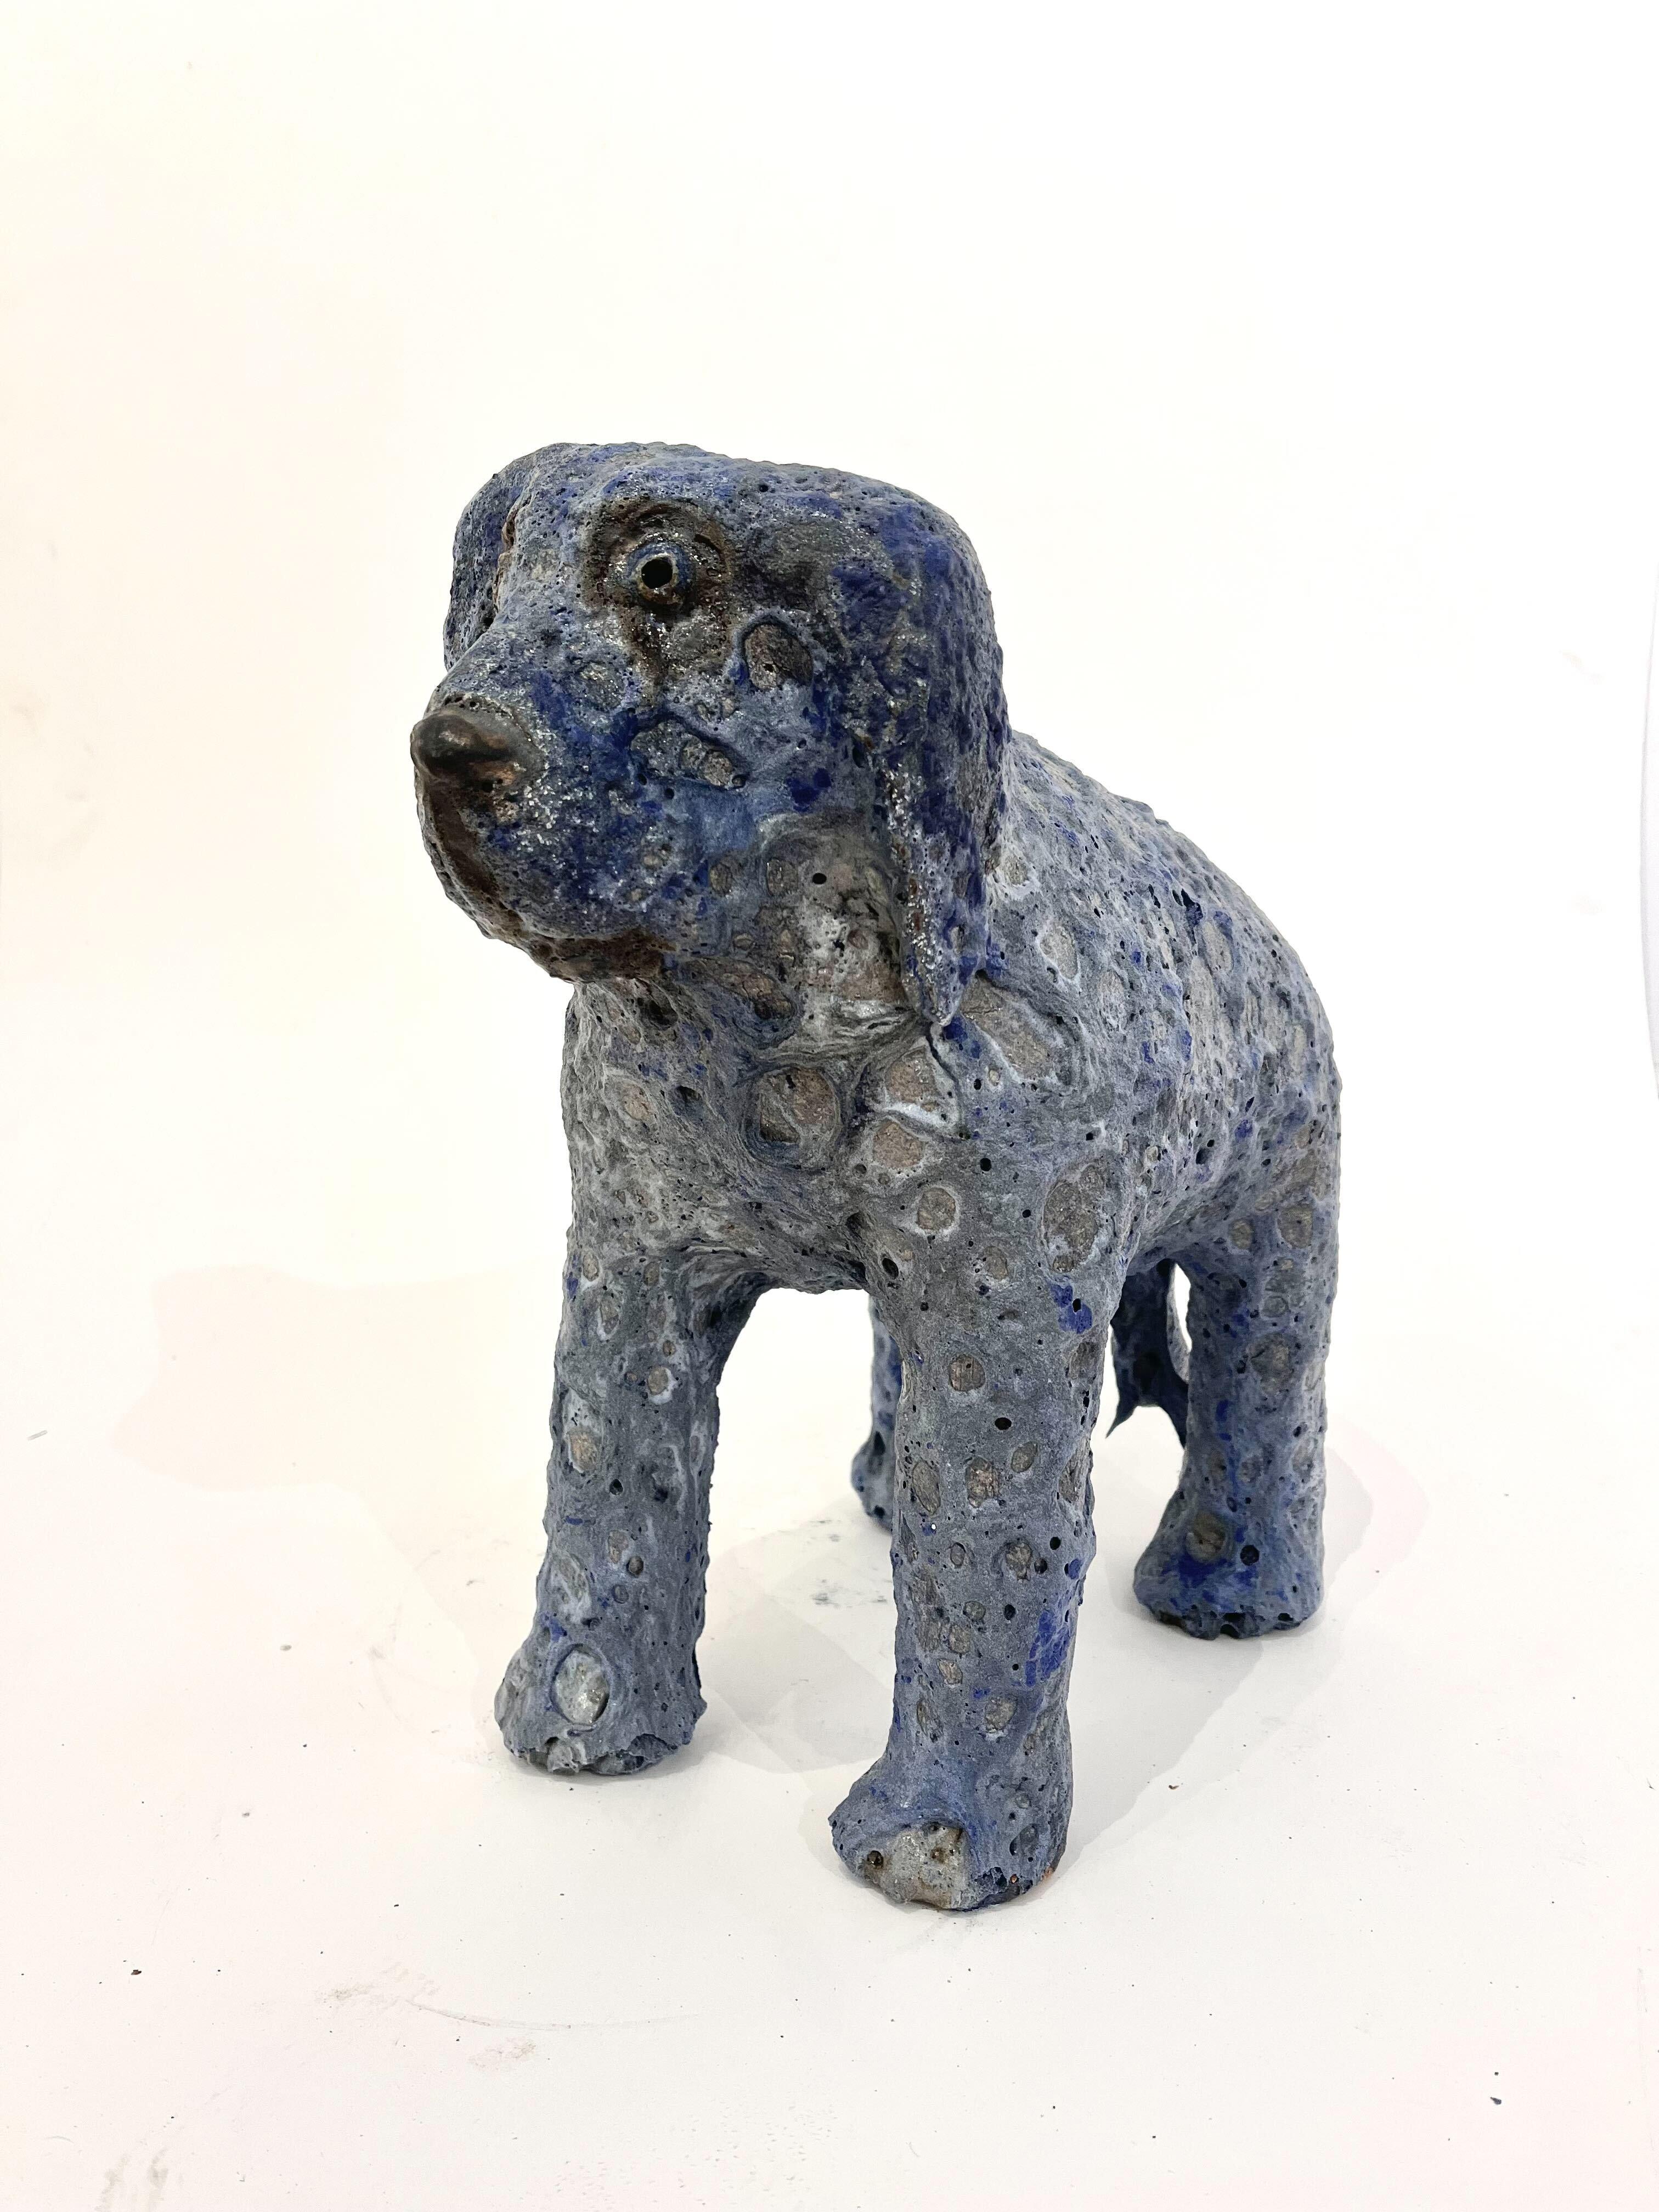 Standing Pup - Sculpture by Mark Chatterley